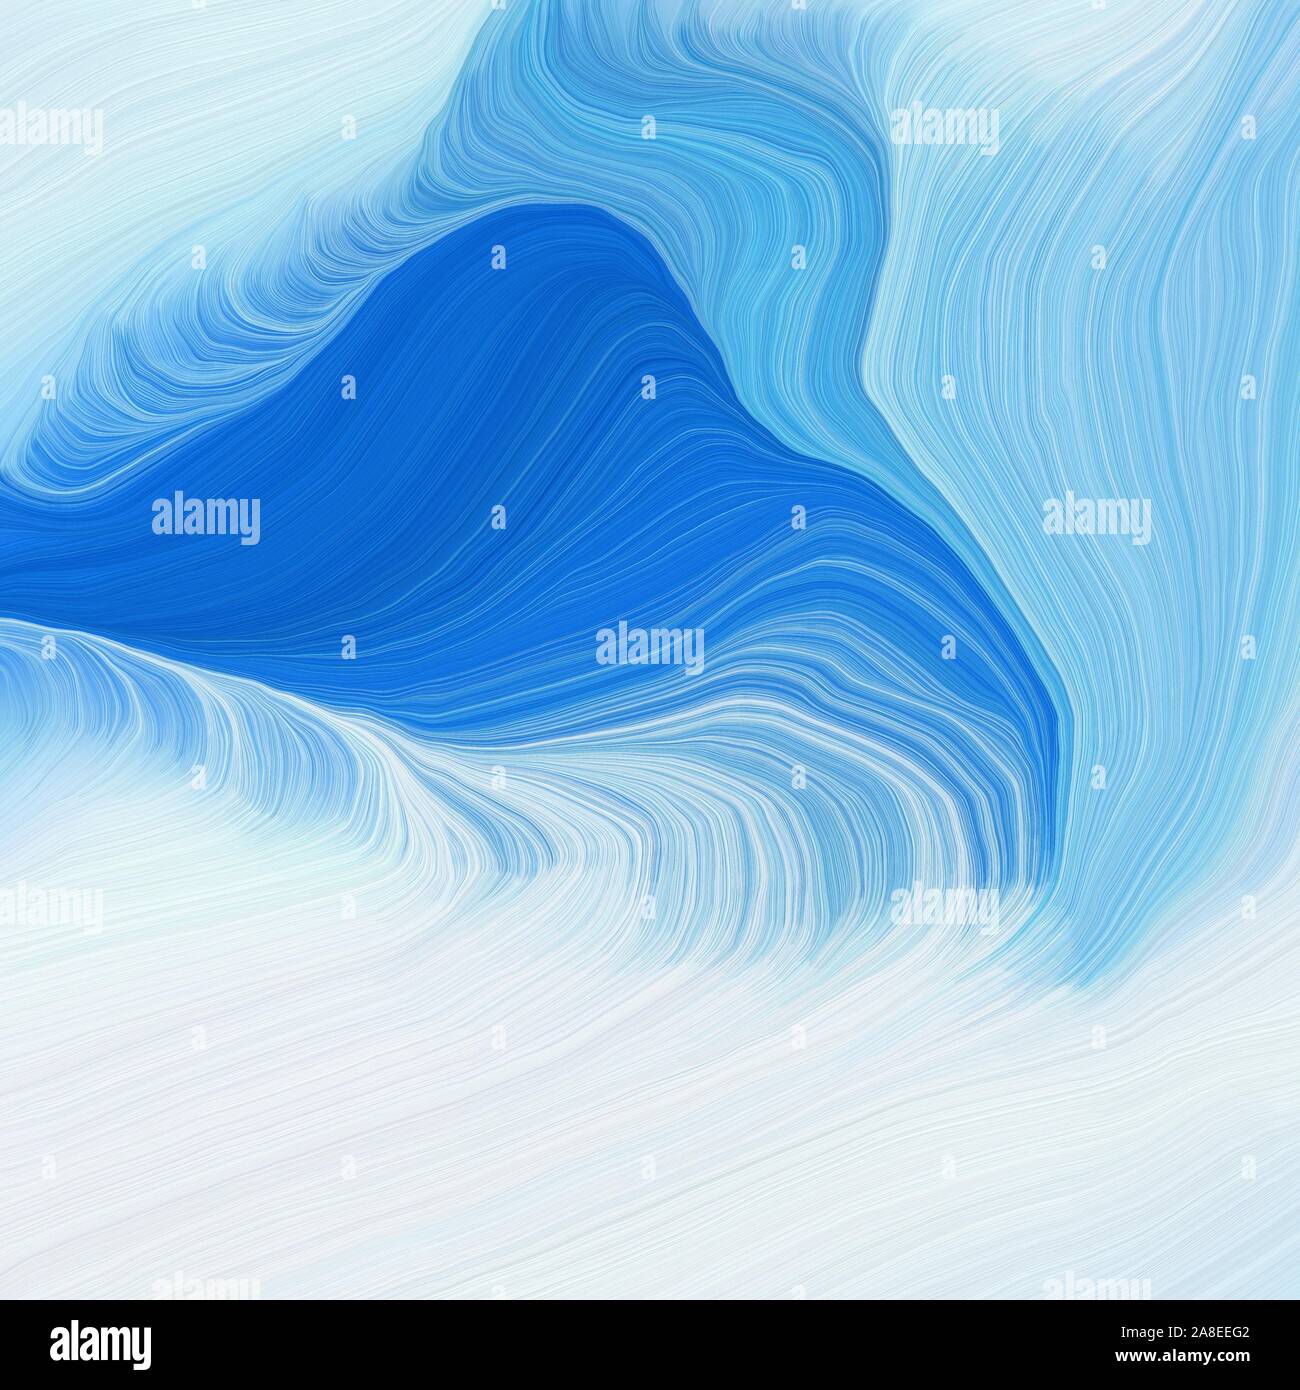 square graphic illustration with lavender, royal blue and sky blue colors.  abstract design swirl waves. can be used as wallpaper, background graphic o  Stock Photo - Alamy